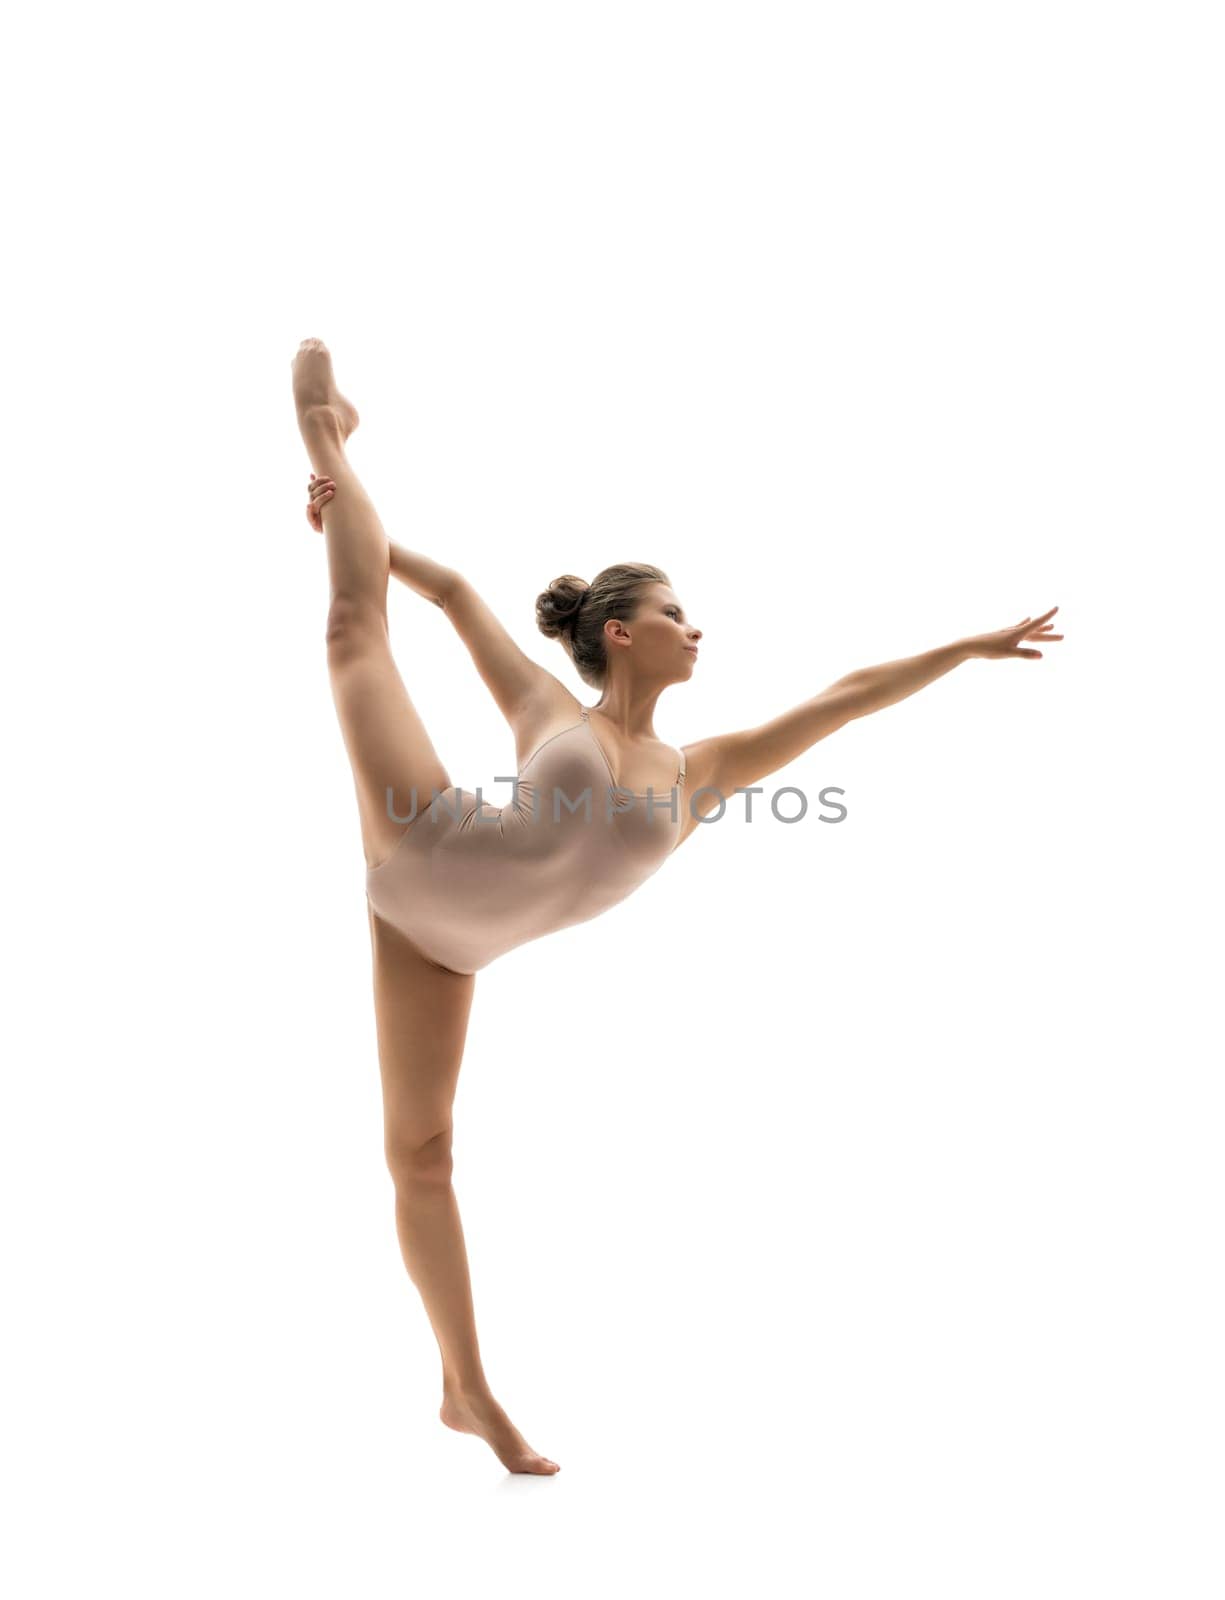 Graceful dancer performs vertical gymnastic split. Isolated on white